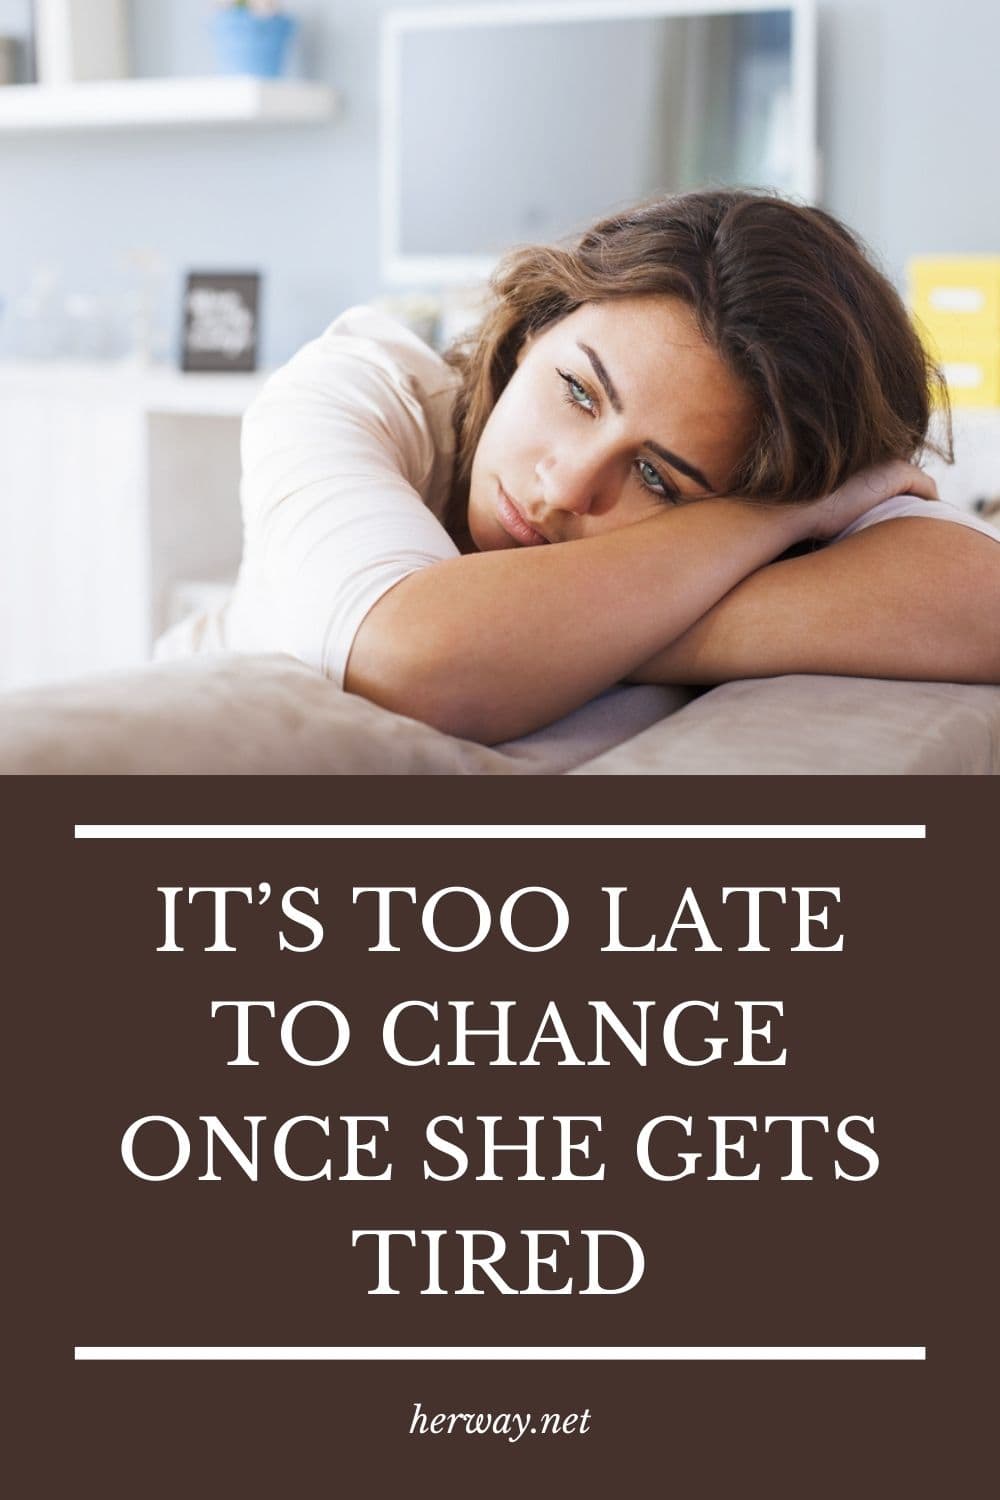 It’s Too Late To Change Once She Gets Tired